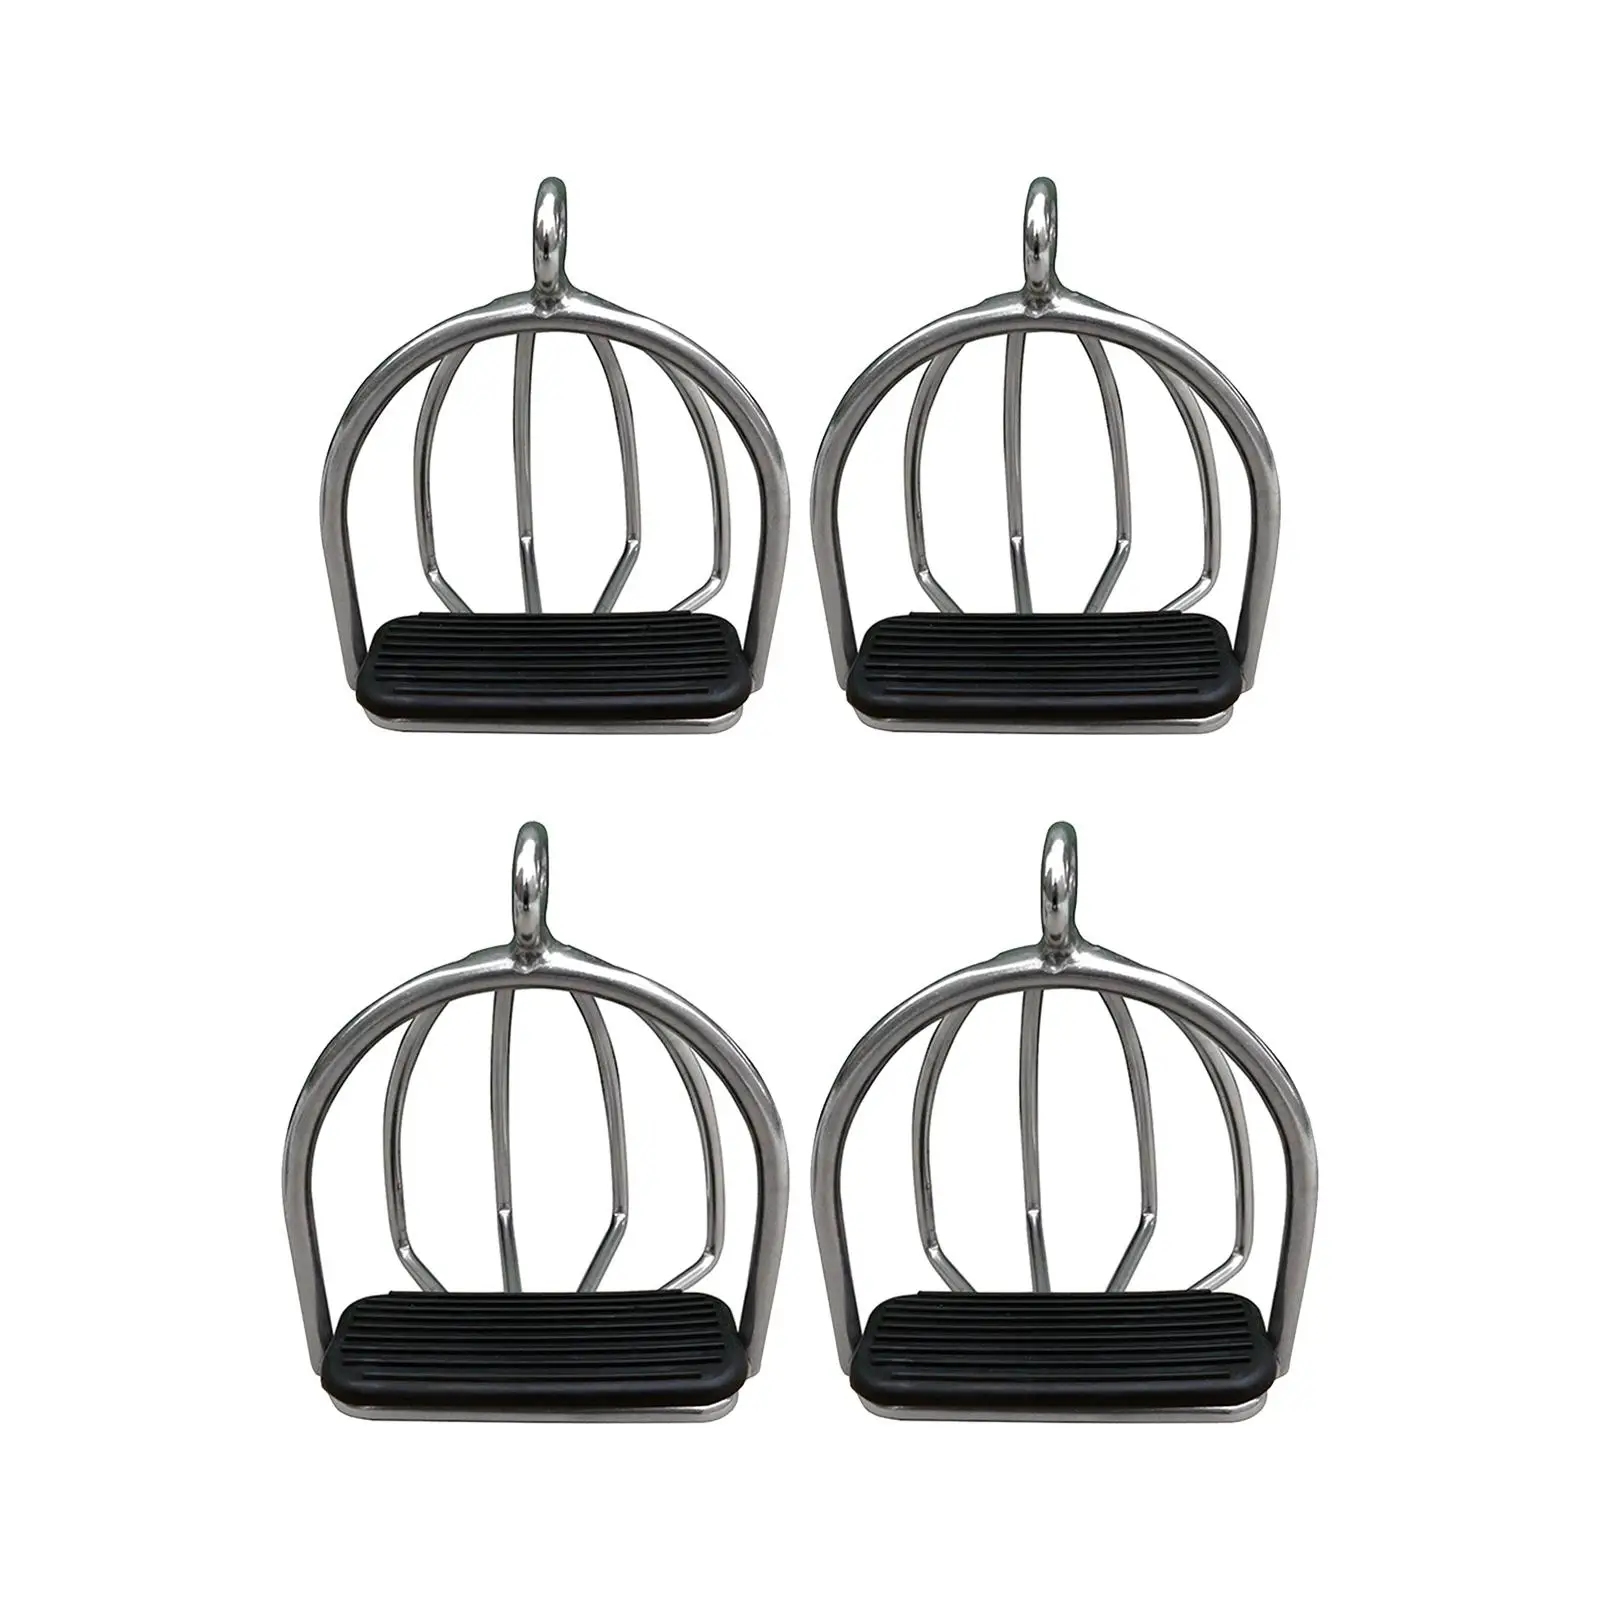 2Pcs Cage Horse Riding Stirrups Steel Flexible Tool Anti-Skid High Strength for Horse Riding Outdoor Sports Supplies Kids Adults